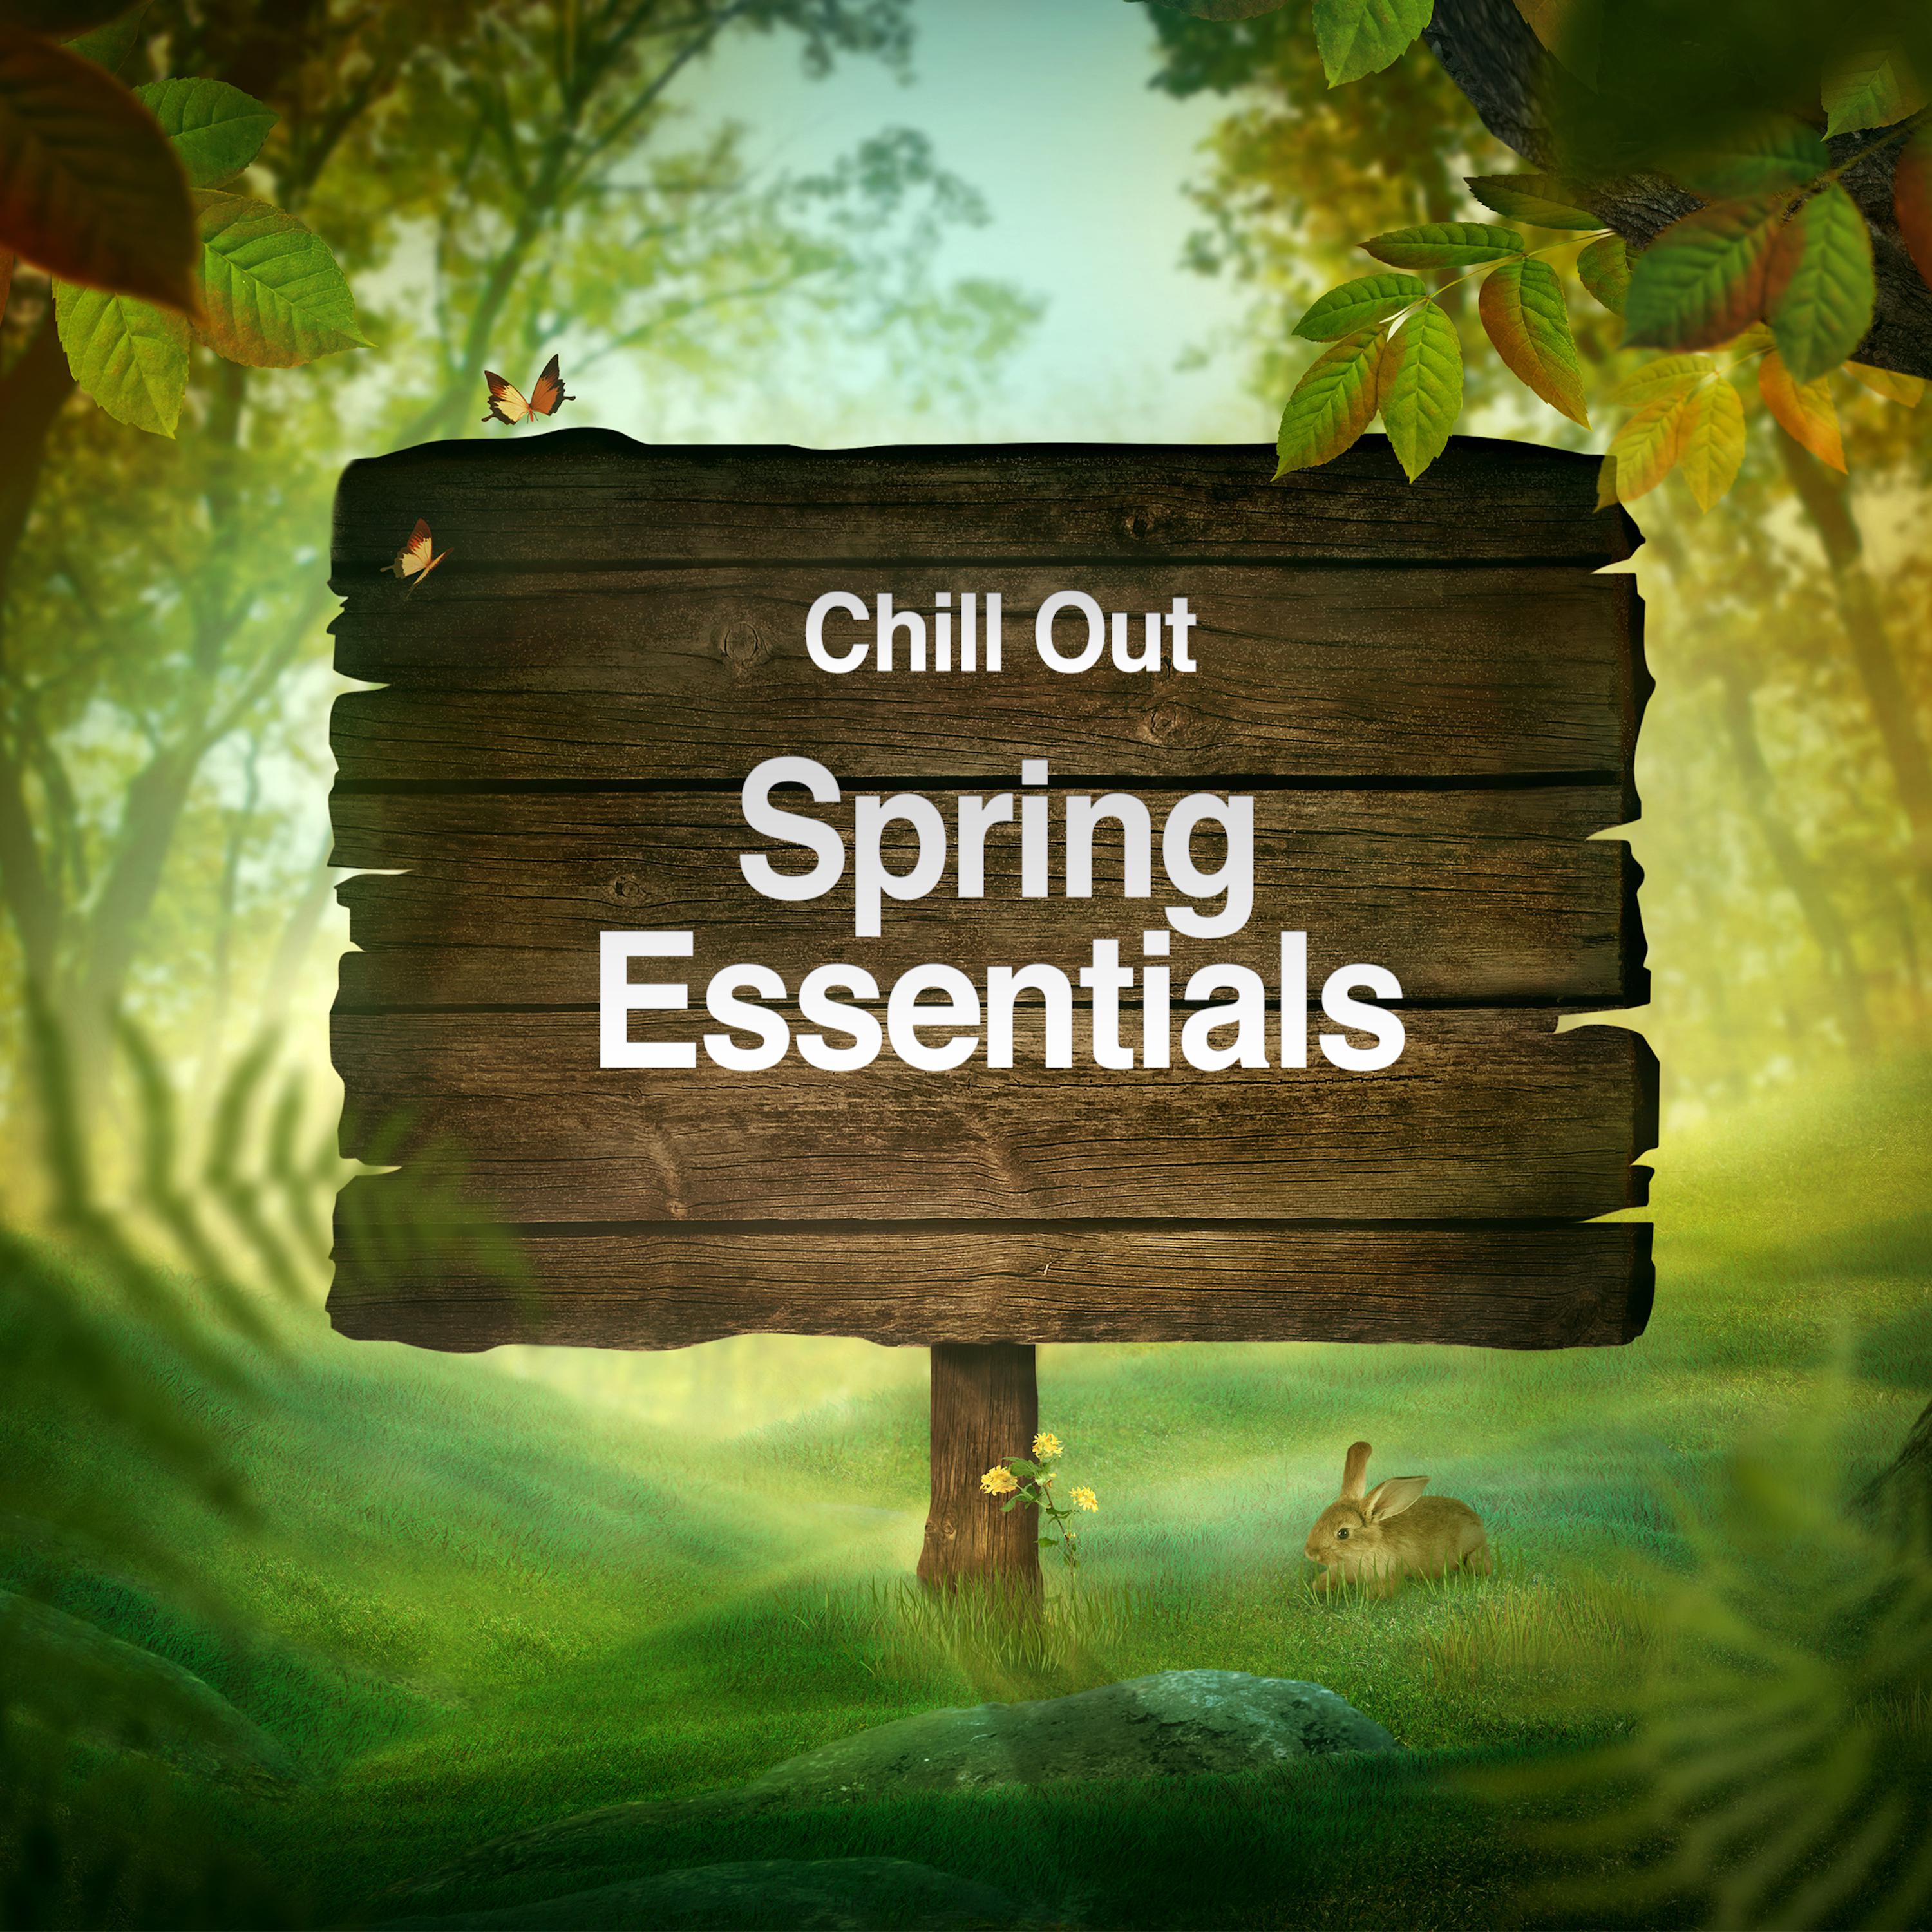 Chill Out - Spring Essentials